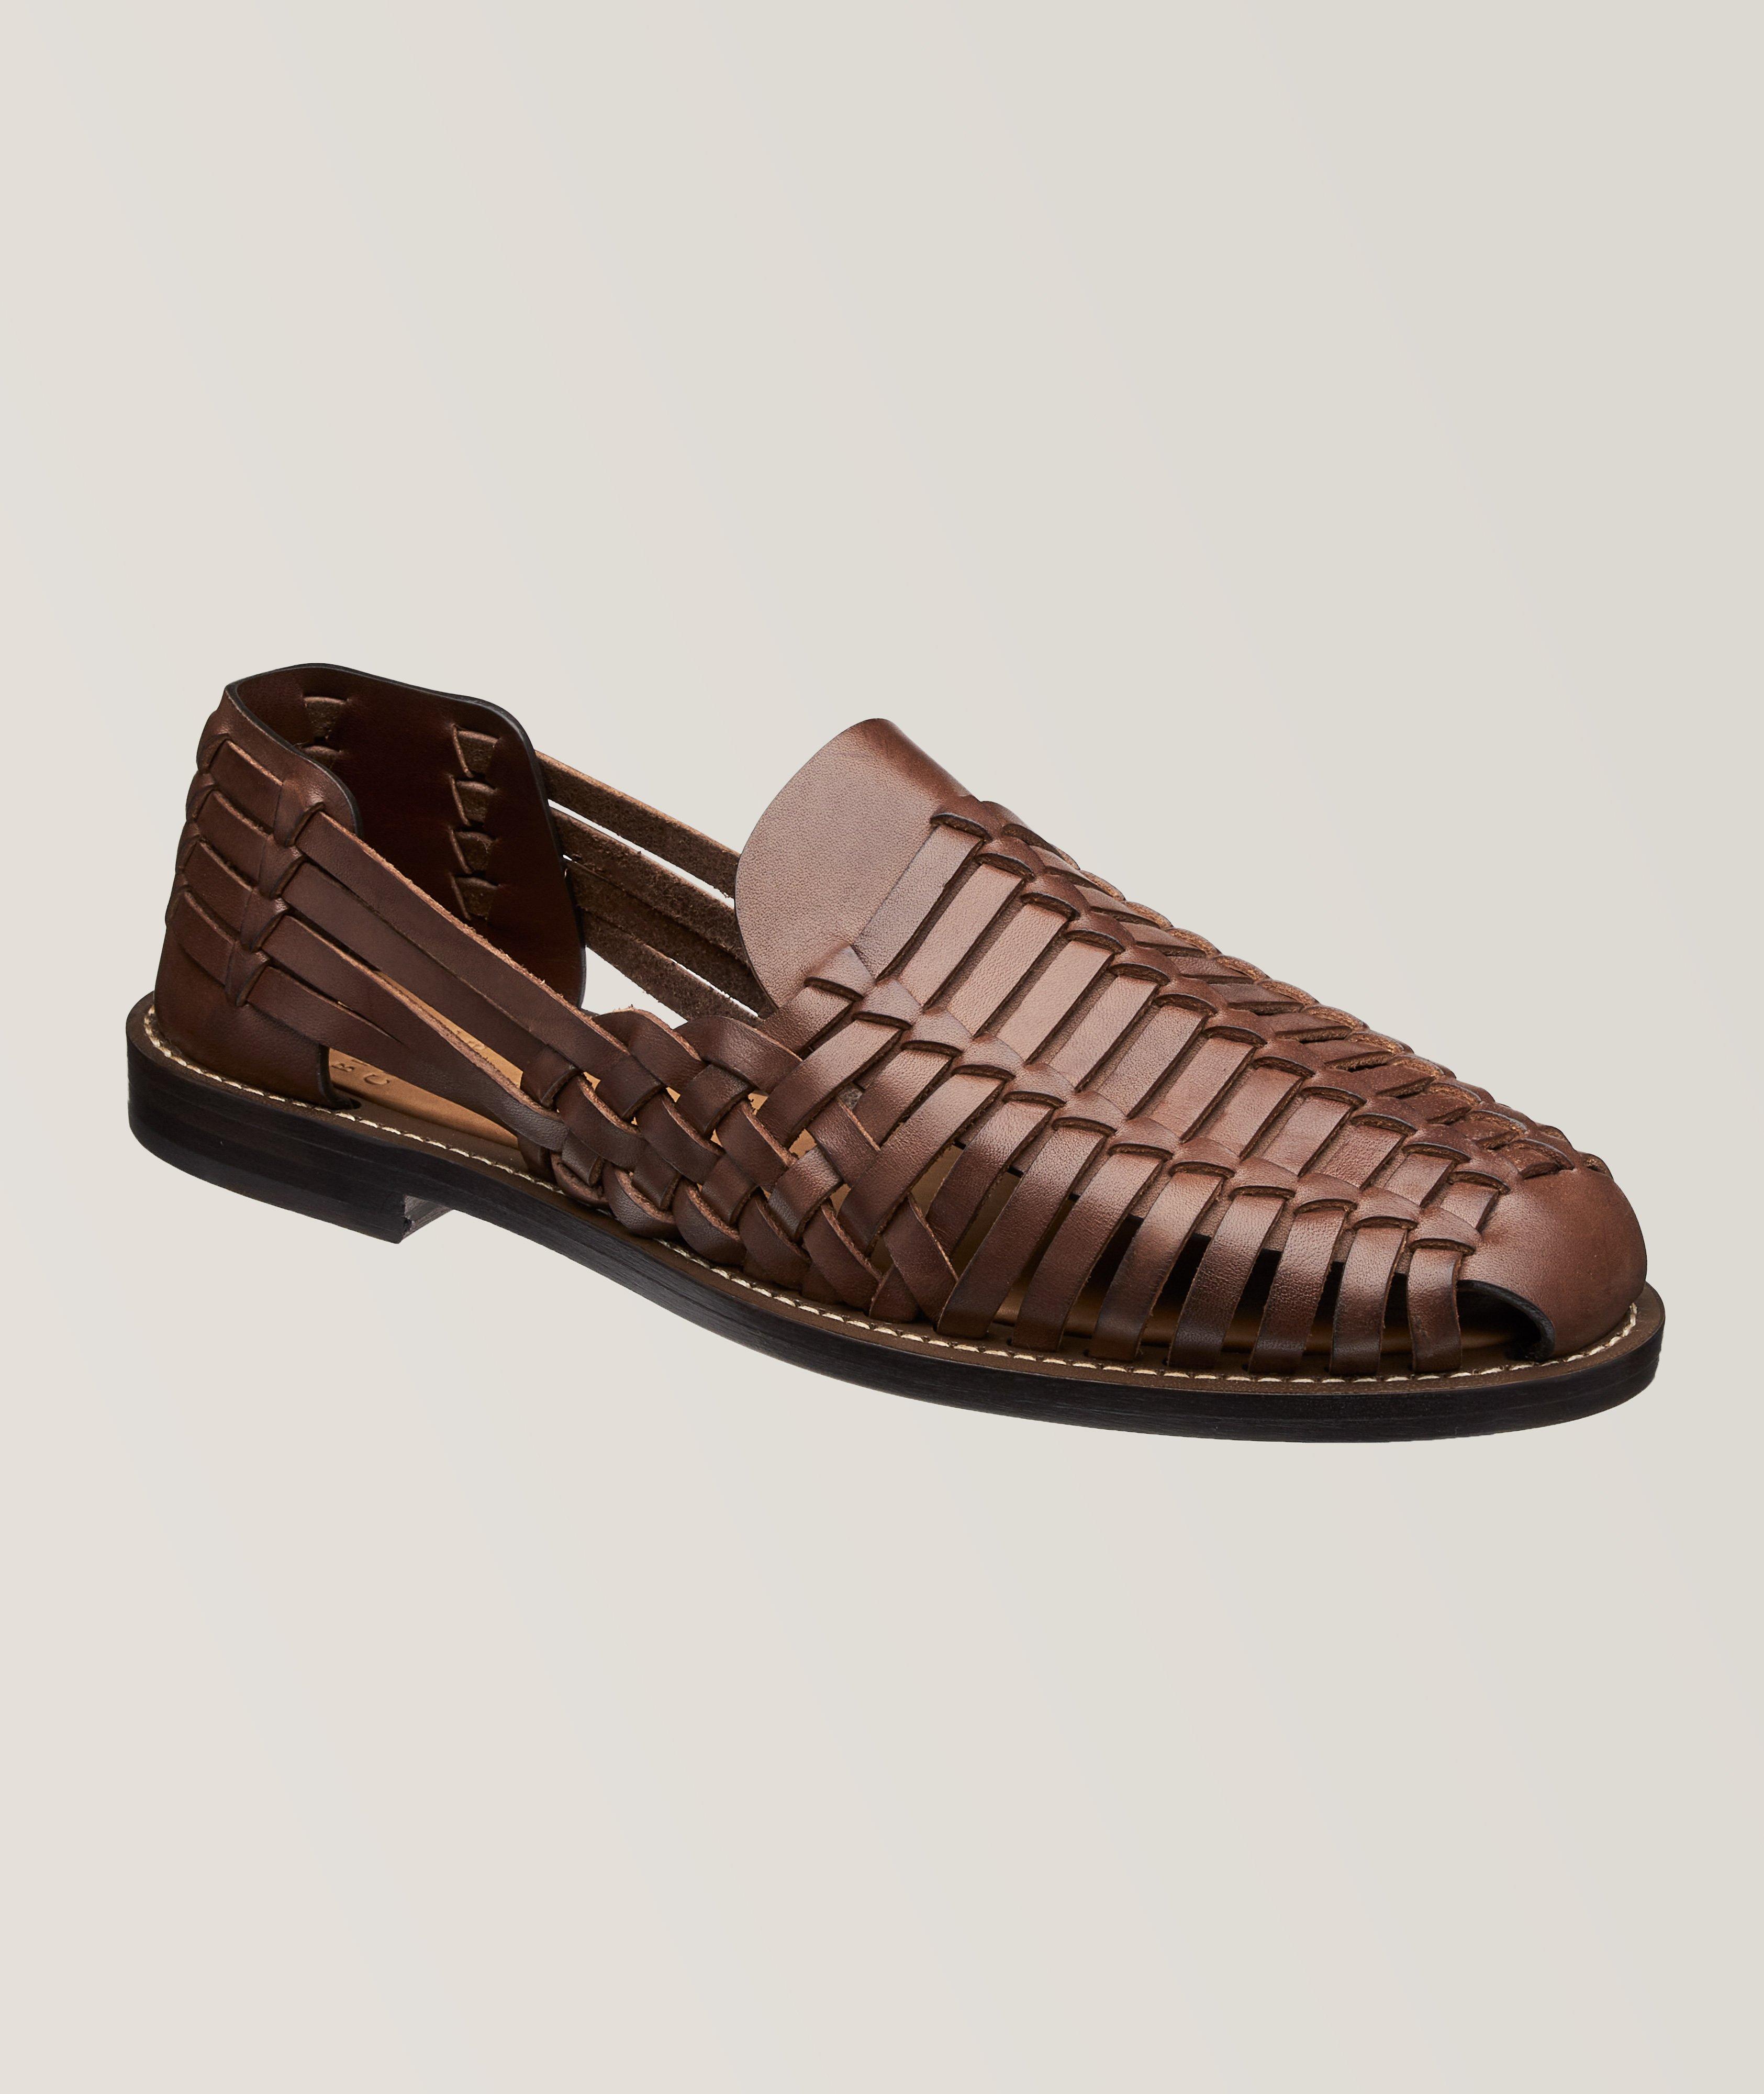 Brunello Cucinelli Woven Leather Fisherman Sandals in Brown | Men's Size 43